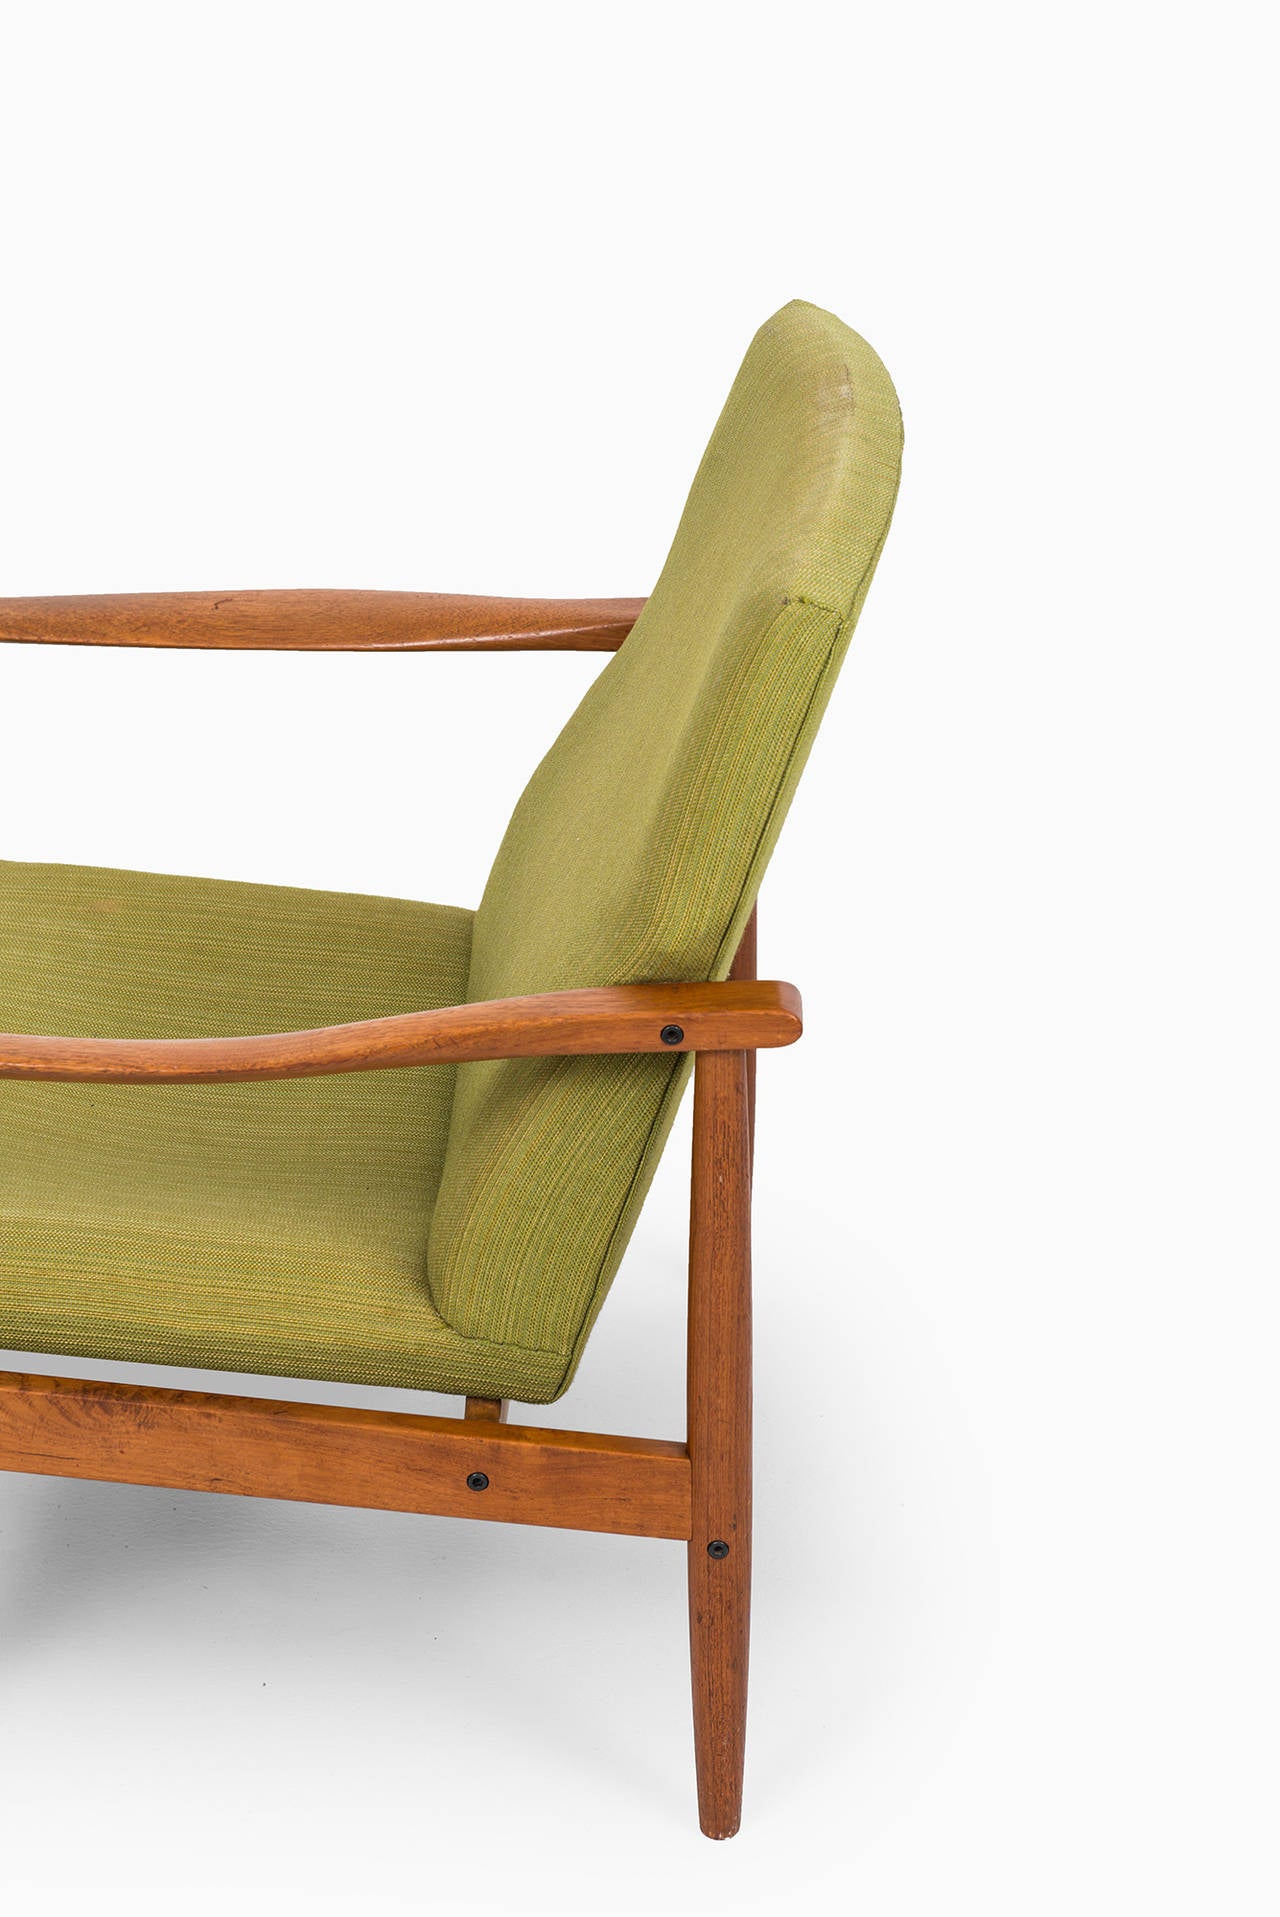 Danish Mid century pair of easy chairs in teak probably produced in Denmark